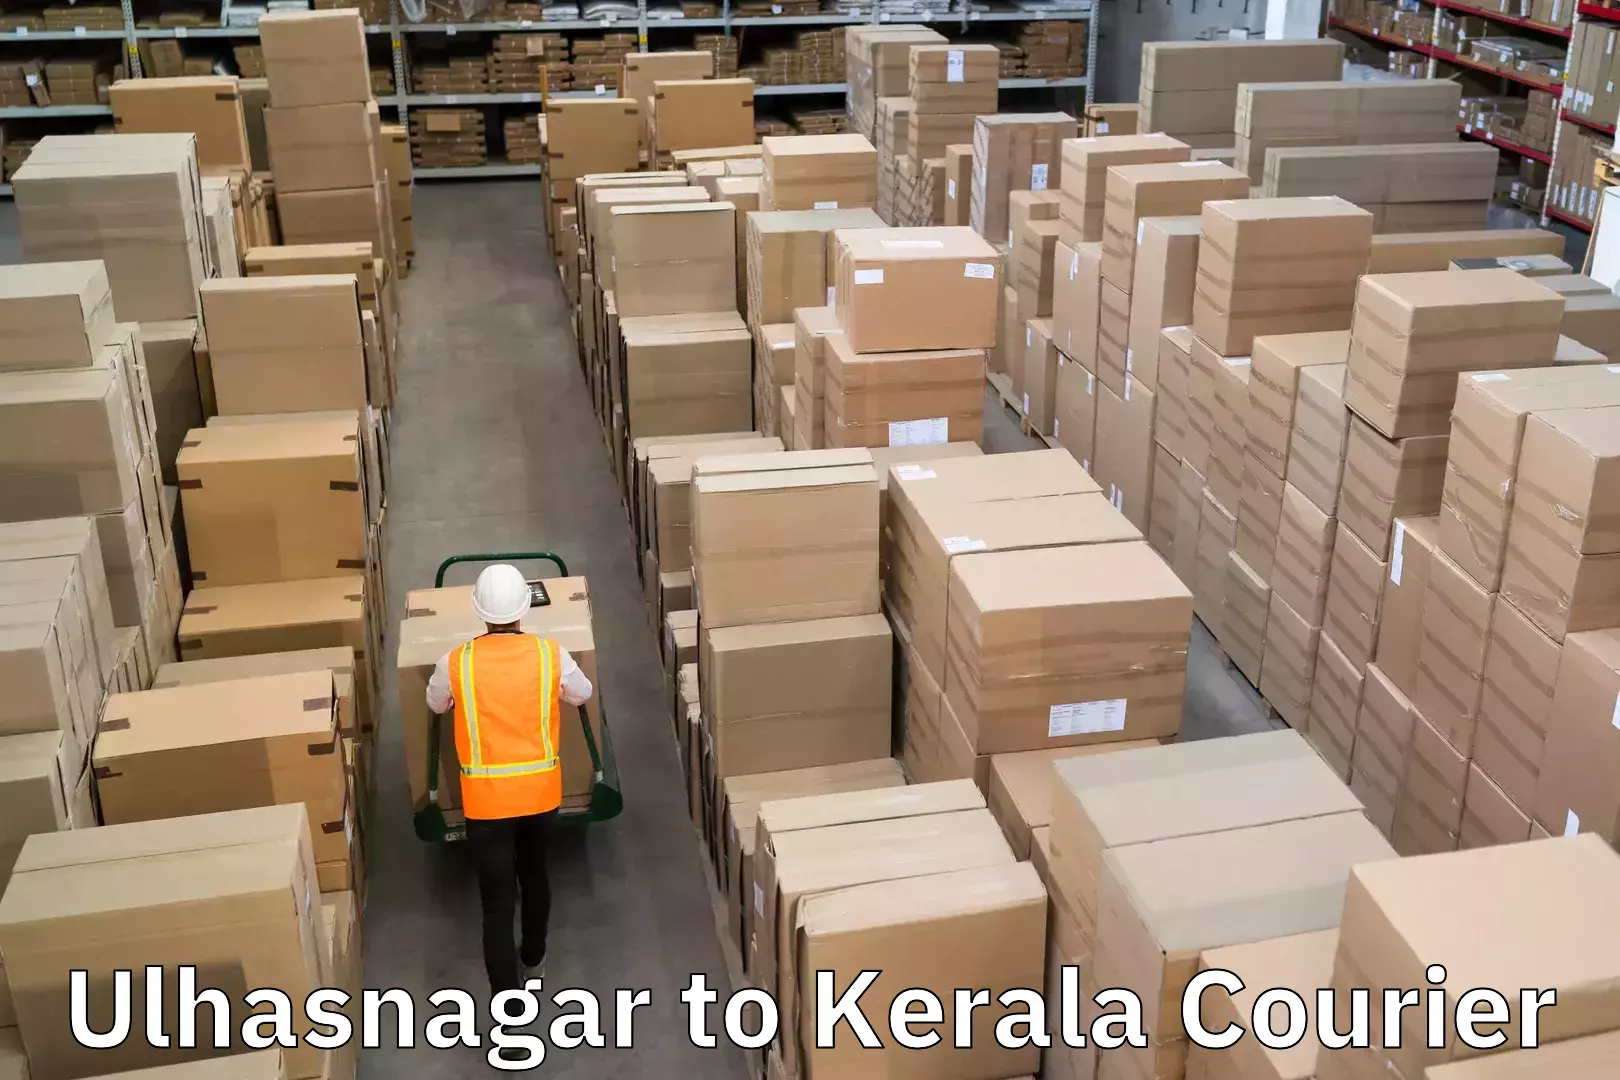 Express delivery network Ulhasnagar to Kerala